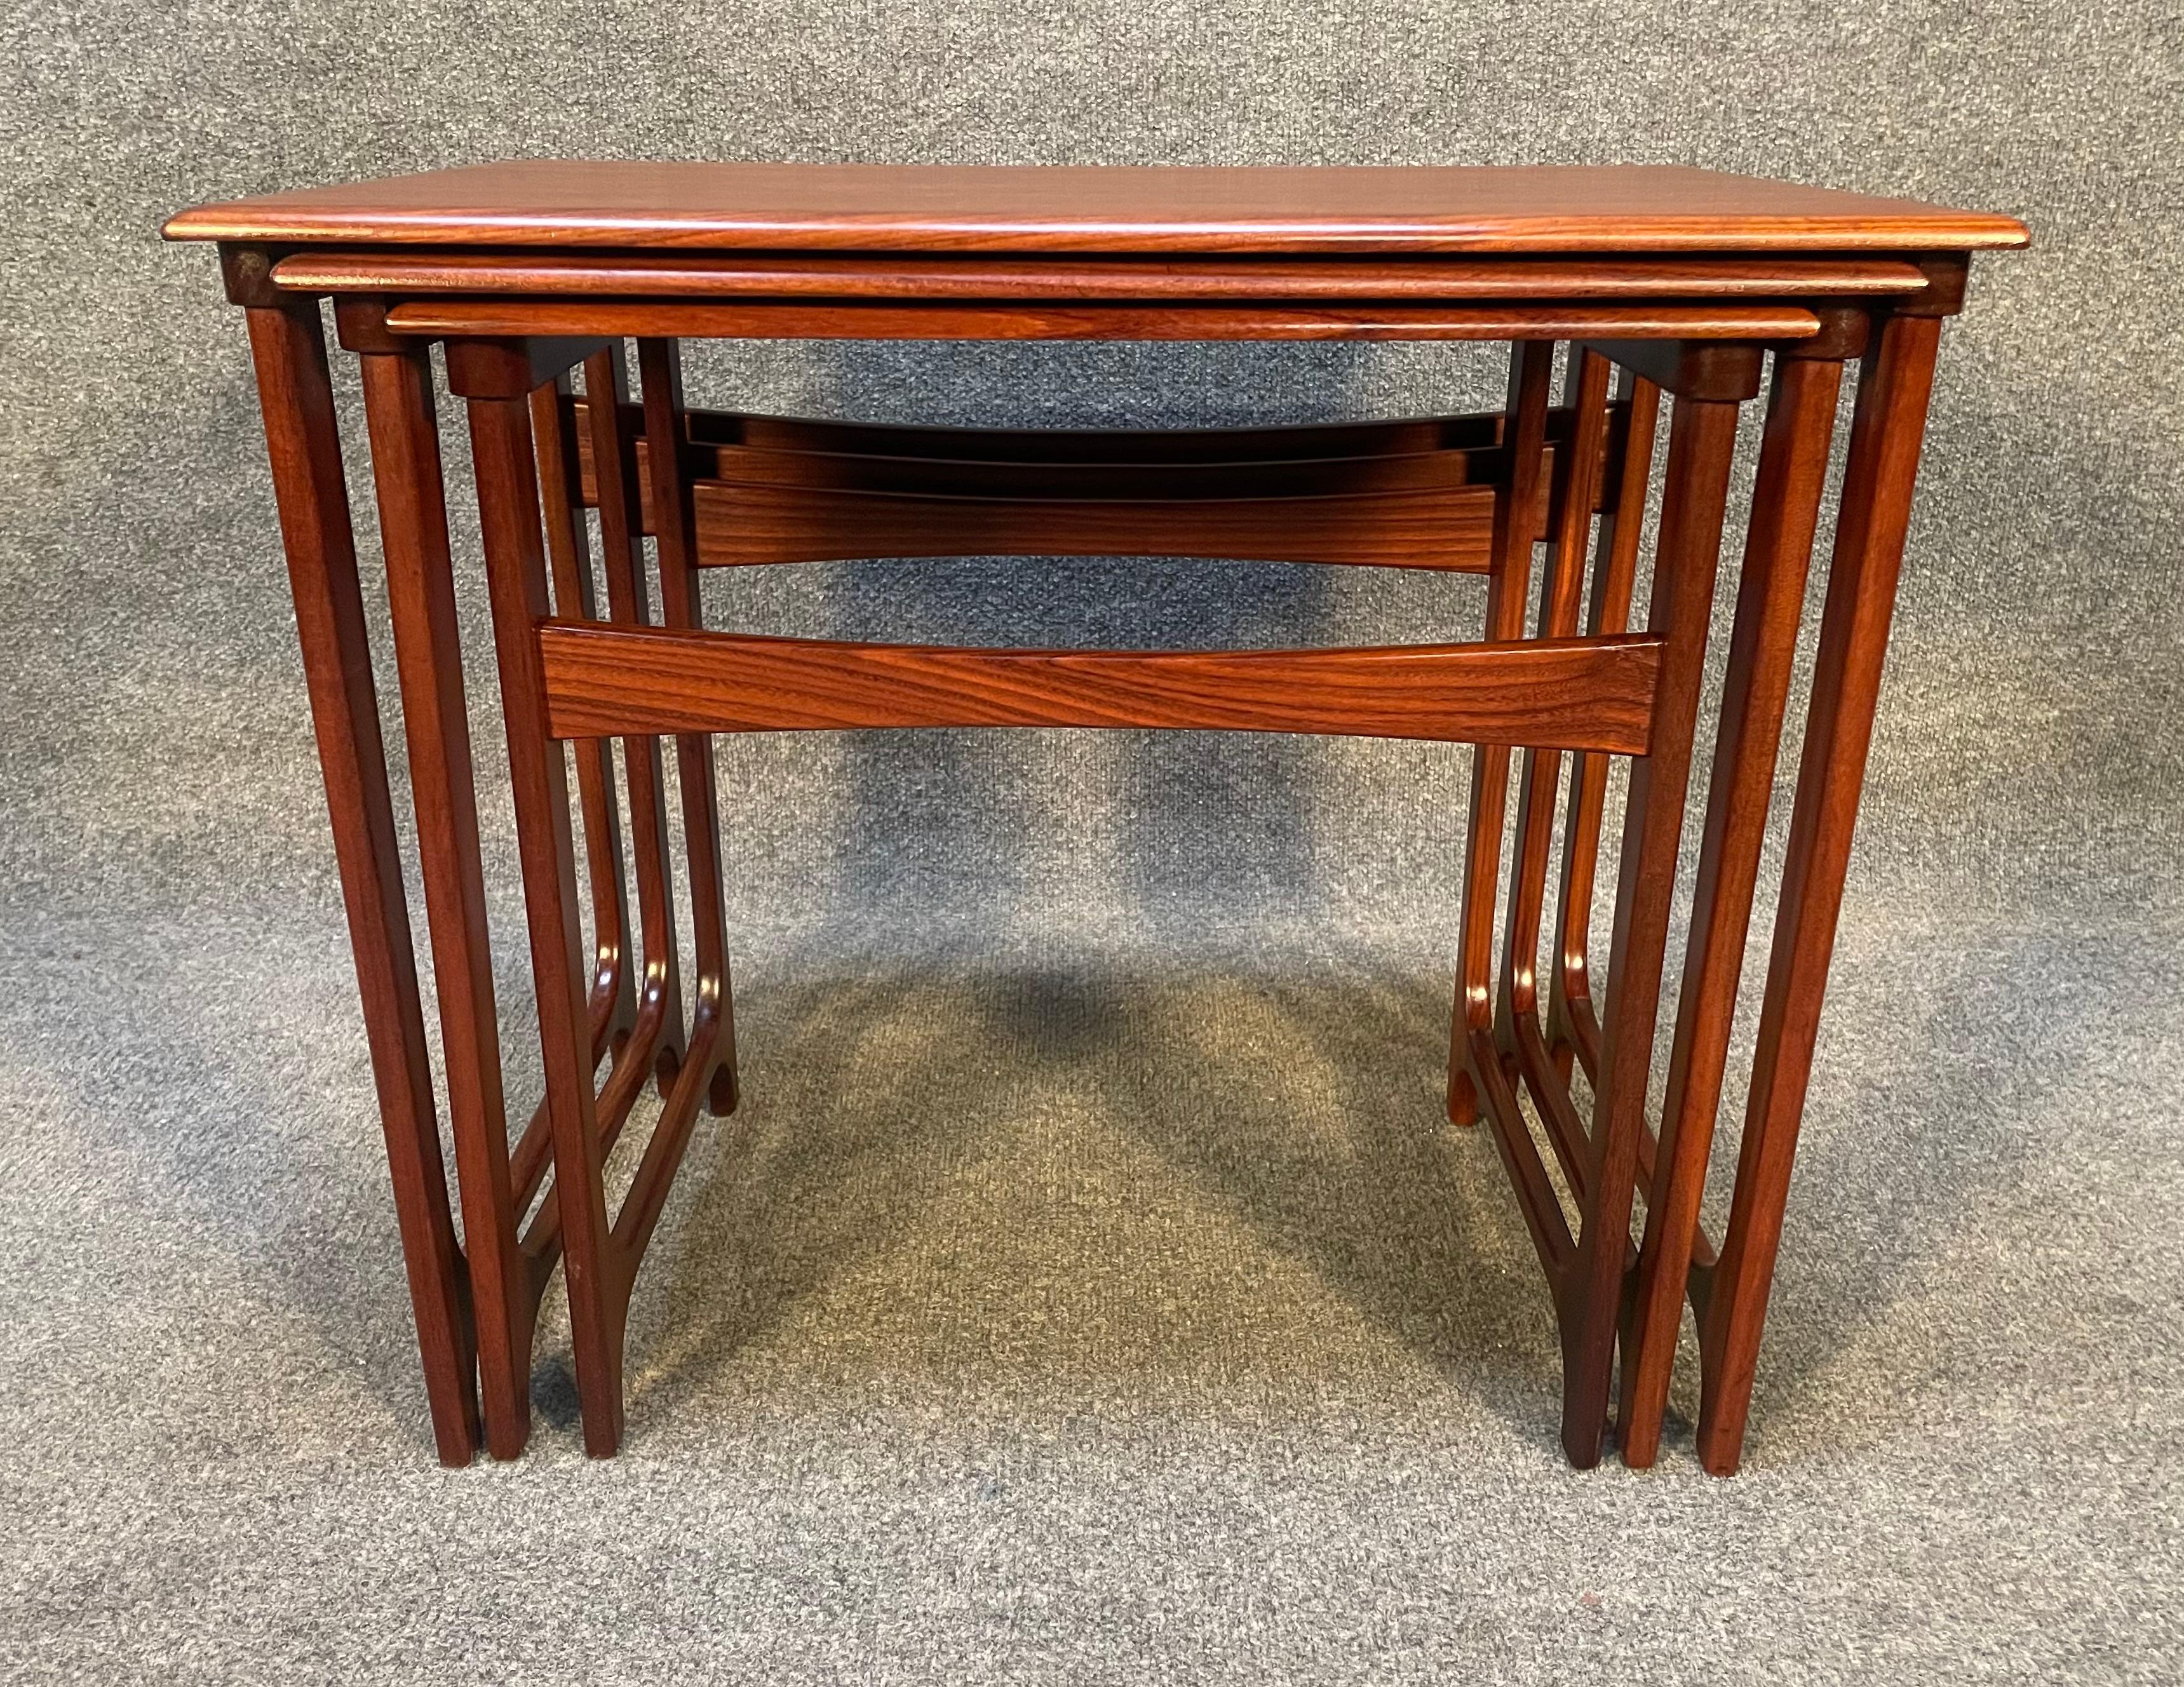 Here is a beautiful set of three Scandinavian modern teak nesting tables manufactured by BC Mobler in Denmark in the 1960s.
This exquisite set, recently imported from Europe to California before its refinishing, features a vibrant wood grain, and a